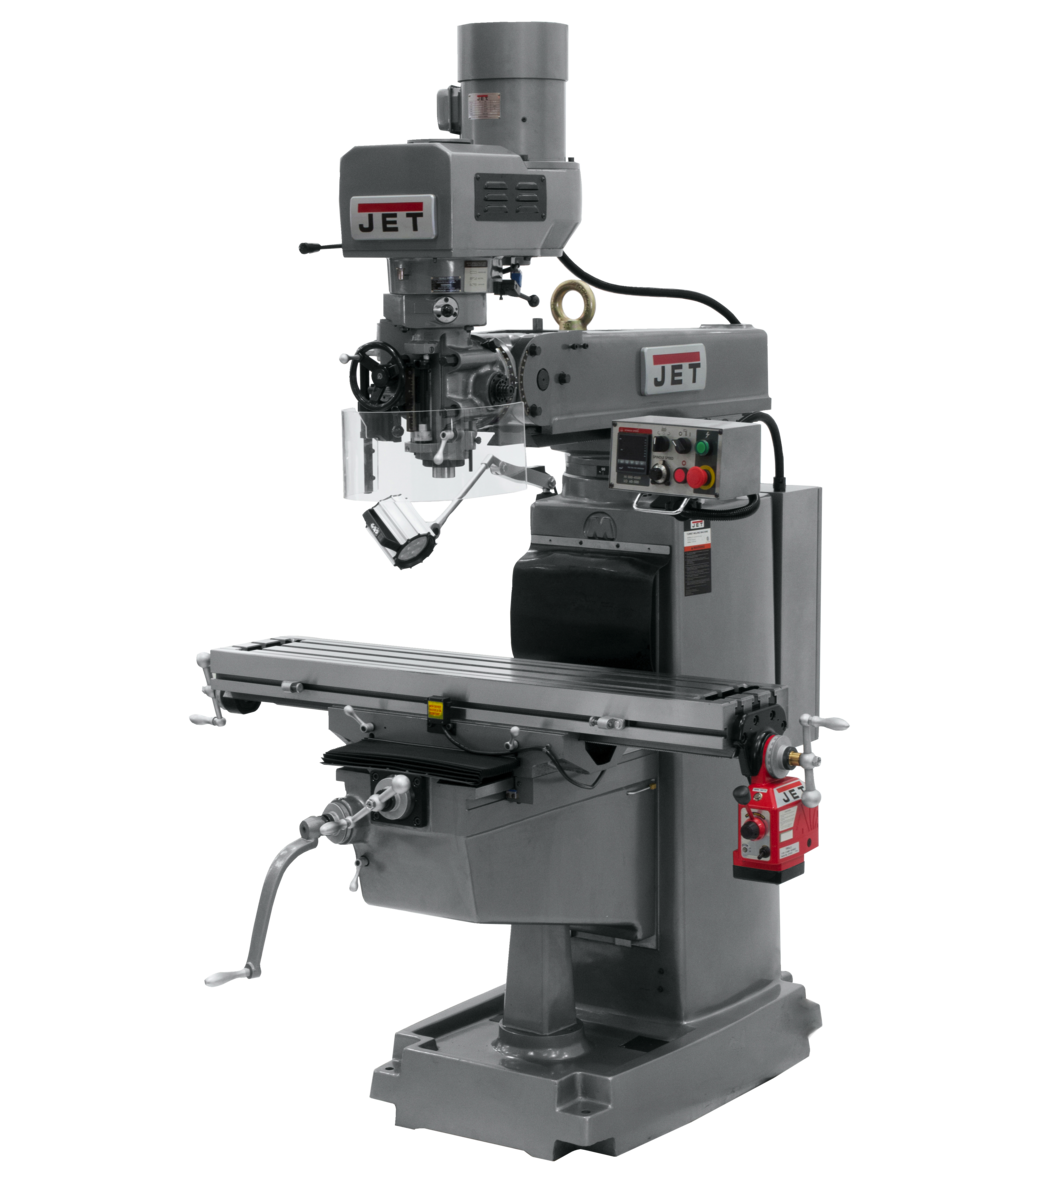 JTM-1050EVS2/230 Mill With 3-Axis Newall DP700 DRO (Knee) With X and Y-Axis Powerfeeds and Air Power